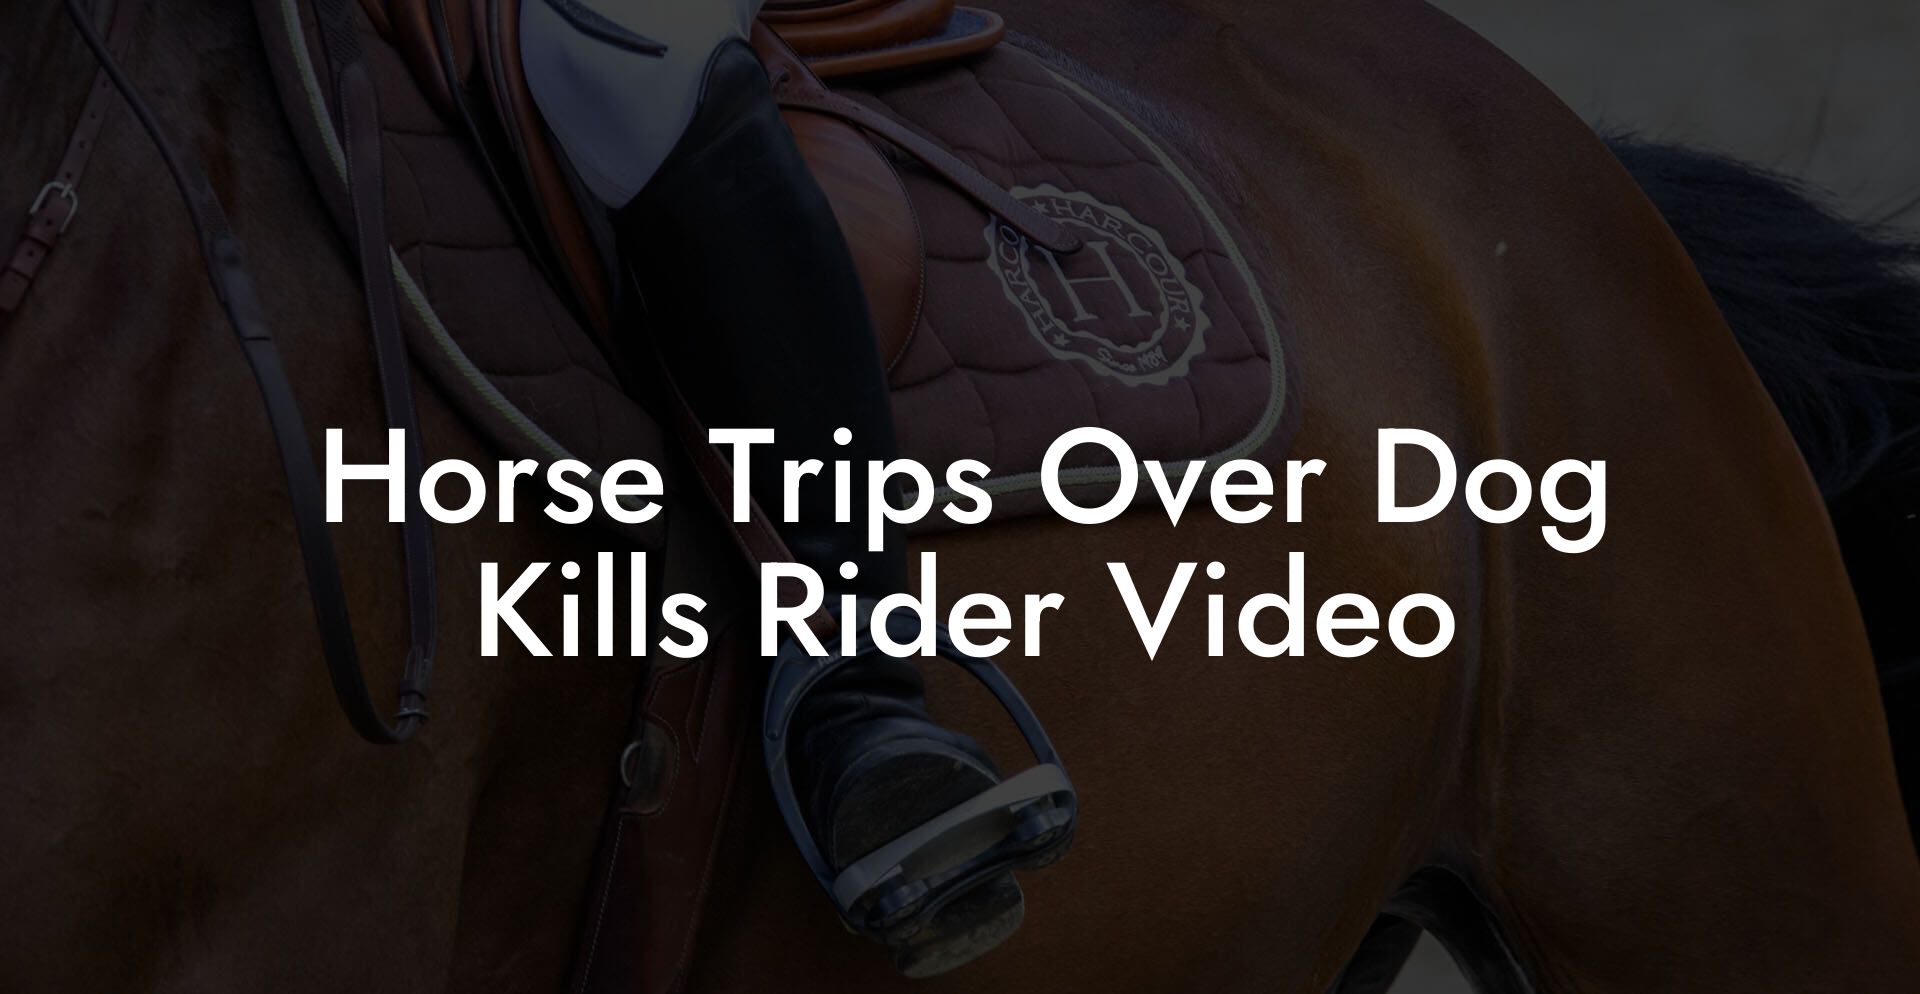 Horse Trips Over Dog Kills Rider Video